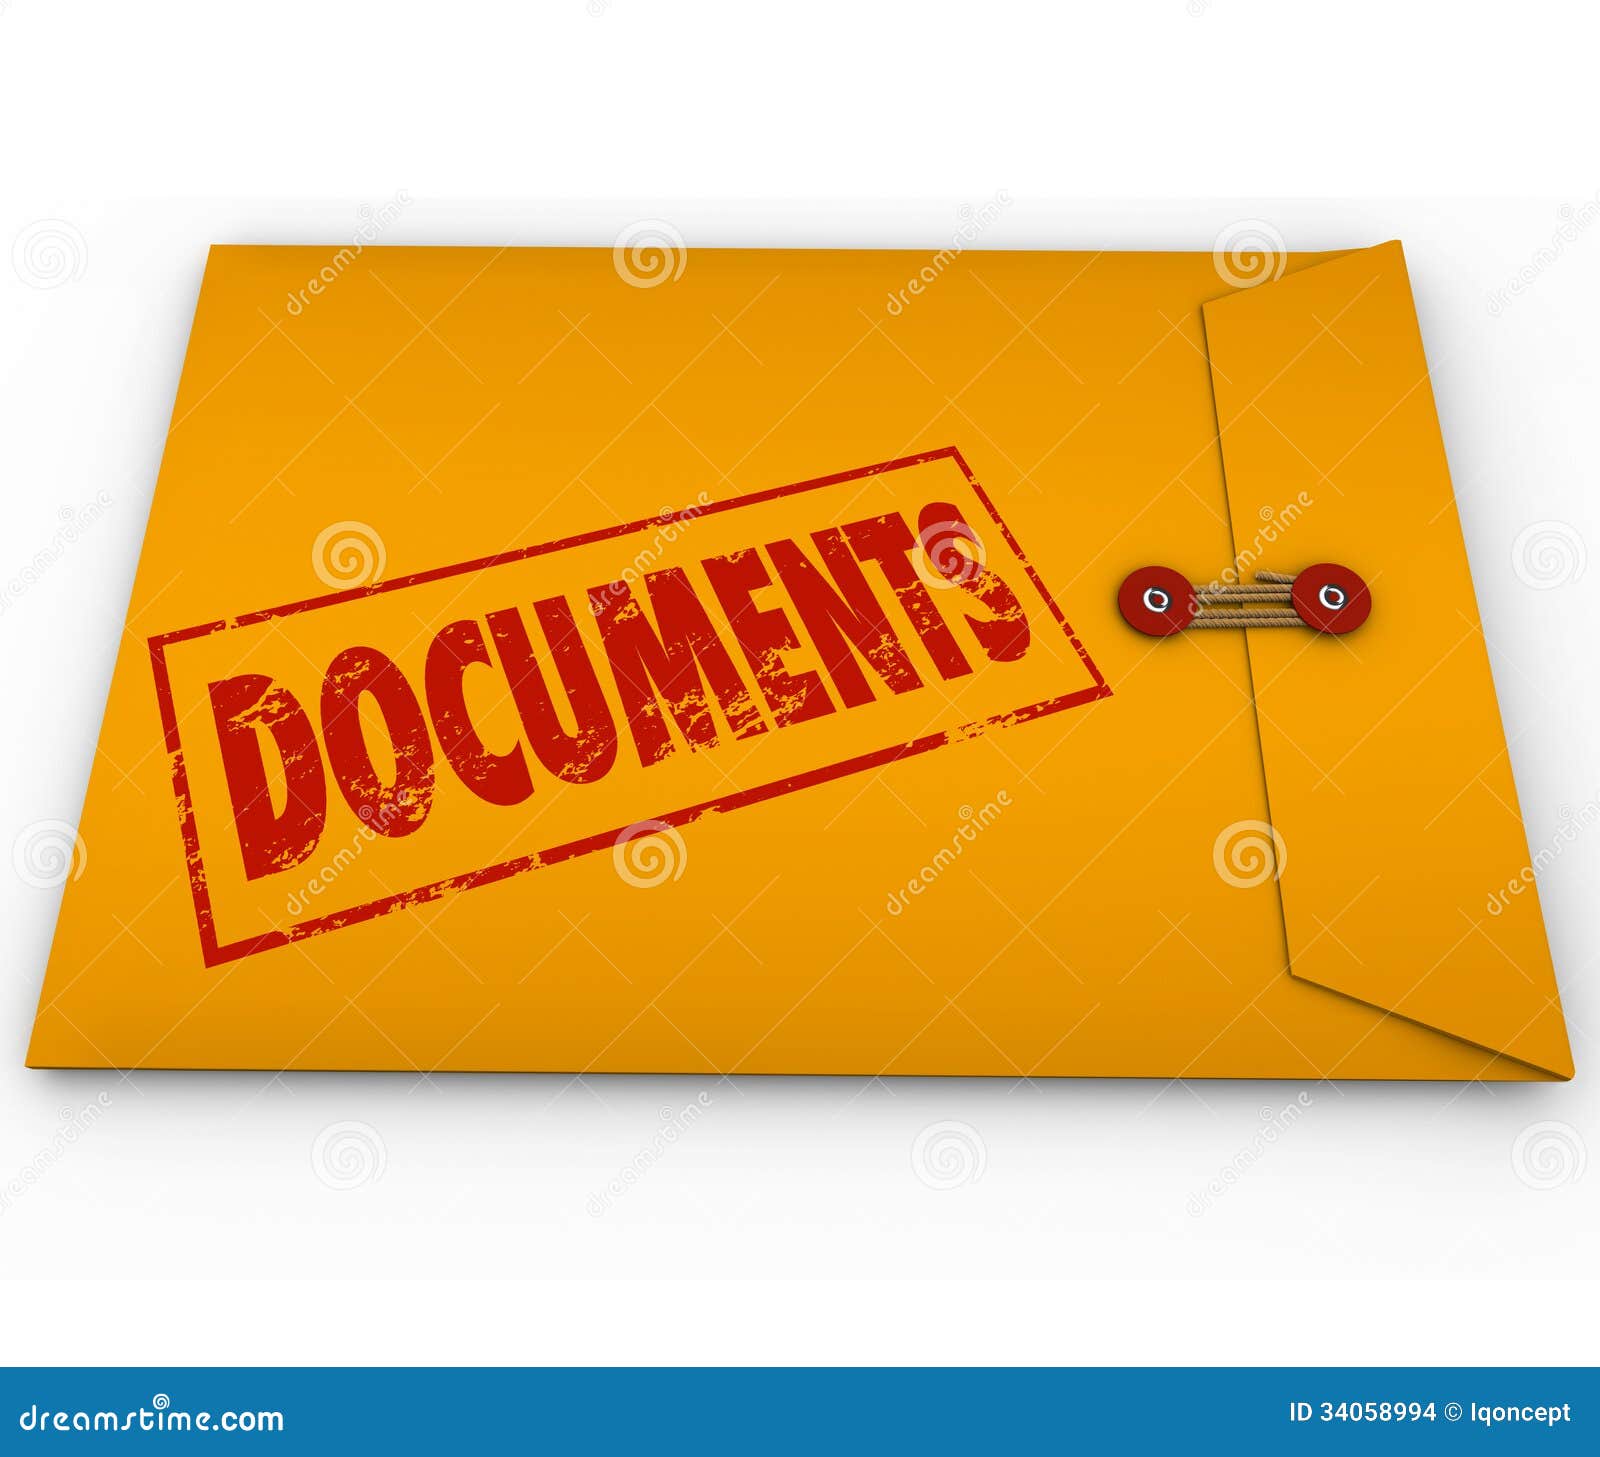 important documents clipart - photo #2